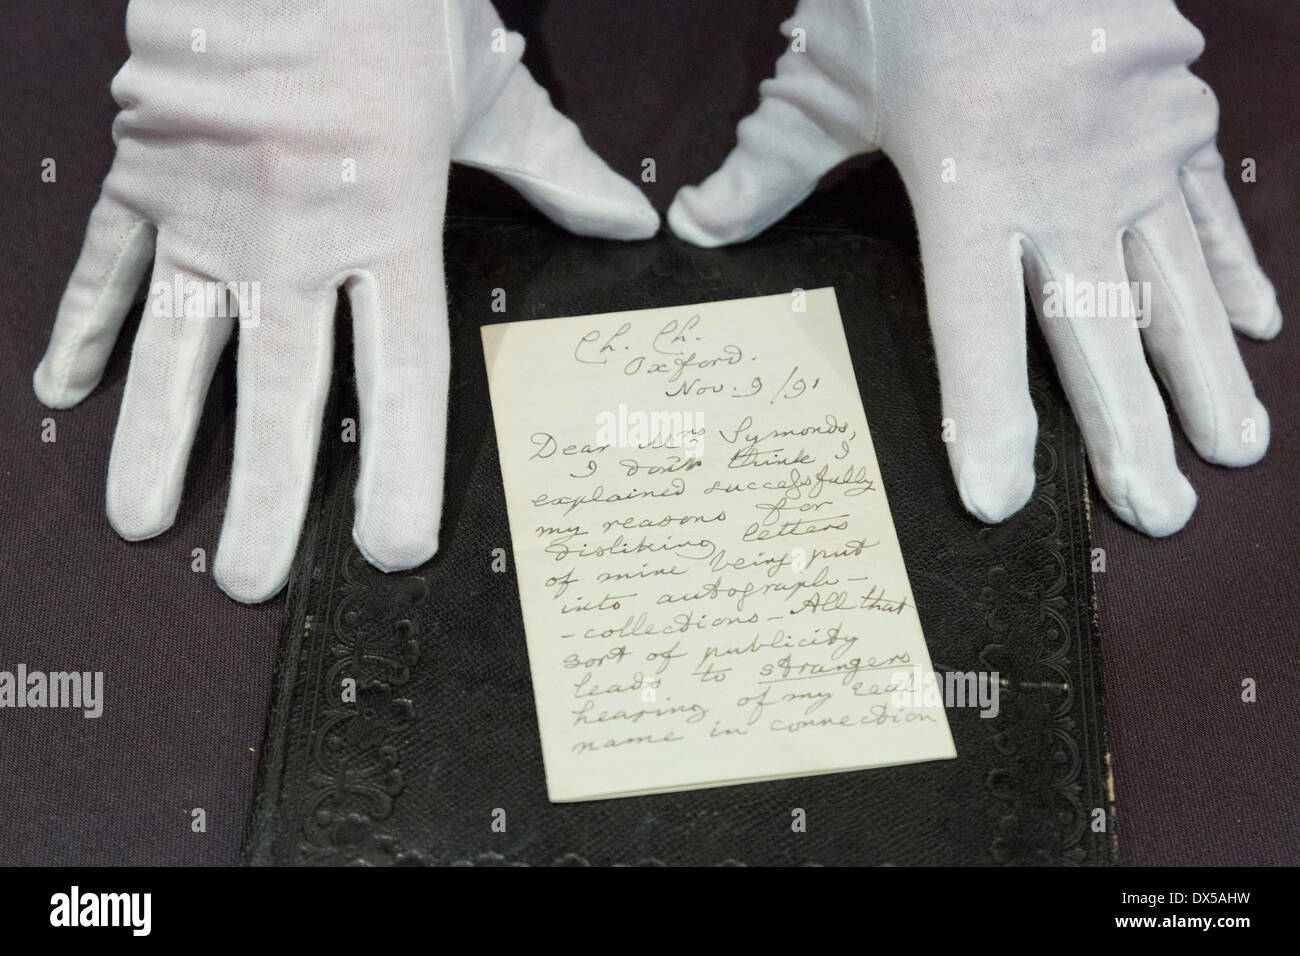 London, UK, 18 March 2014. The letter from Alice in Wonderland author Lewis Carroll (under his real name Charles Dodgson) to a friend complaining about the drawbacks of fame goes under the hammer and is expected to fetch £3,000-£4,000. In the letter, Carroll says he hated publicity so intensely that 'sometimes I almost wish I had never written any books at all'. The Bonhams' Books, Maps, Manuscripts and Historical Photographs auction takes place on 19 March 2014. Credit:  Nick Savage/Alamy Live News Stock Photo